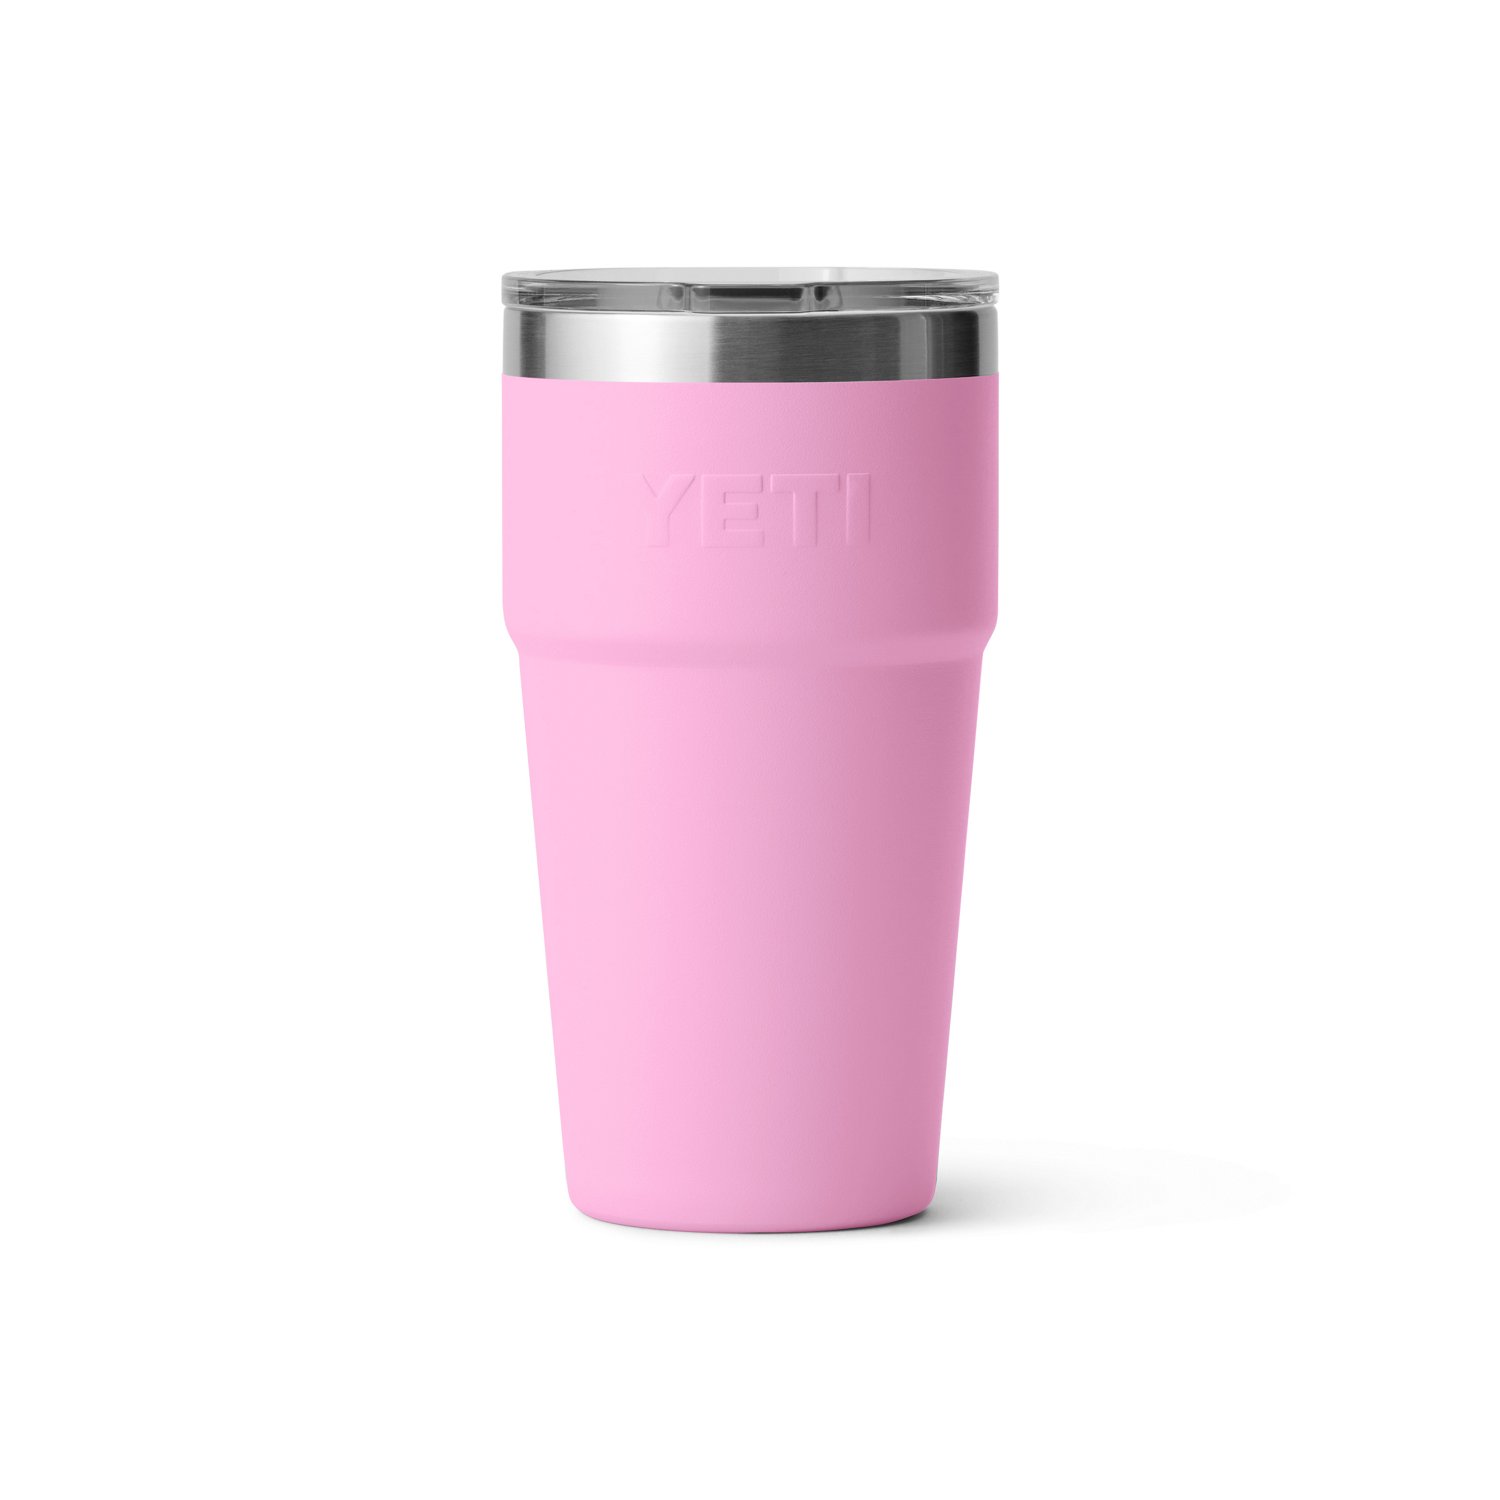 https://academy.scene7.com/is/image/academy//drinkware/yeti-rambler-pint-ms-16oz-tumbler-21071502071-pink/314ce05a768b471abeb7660cd0ccce9a?$pdp-mobile-gallery-ng$